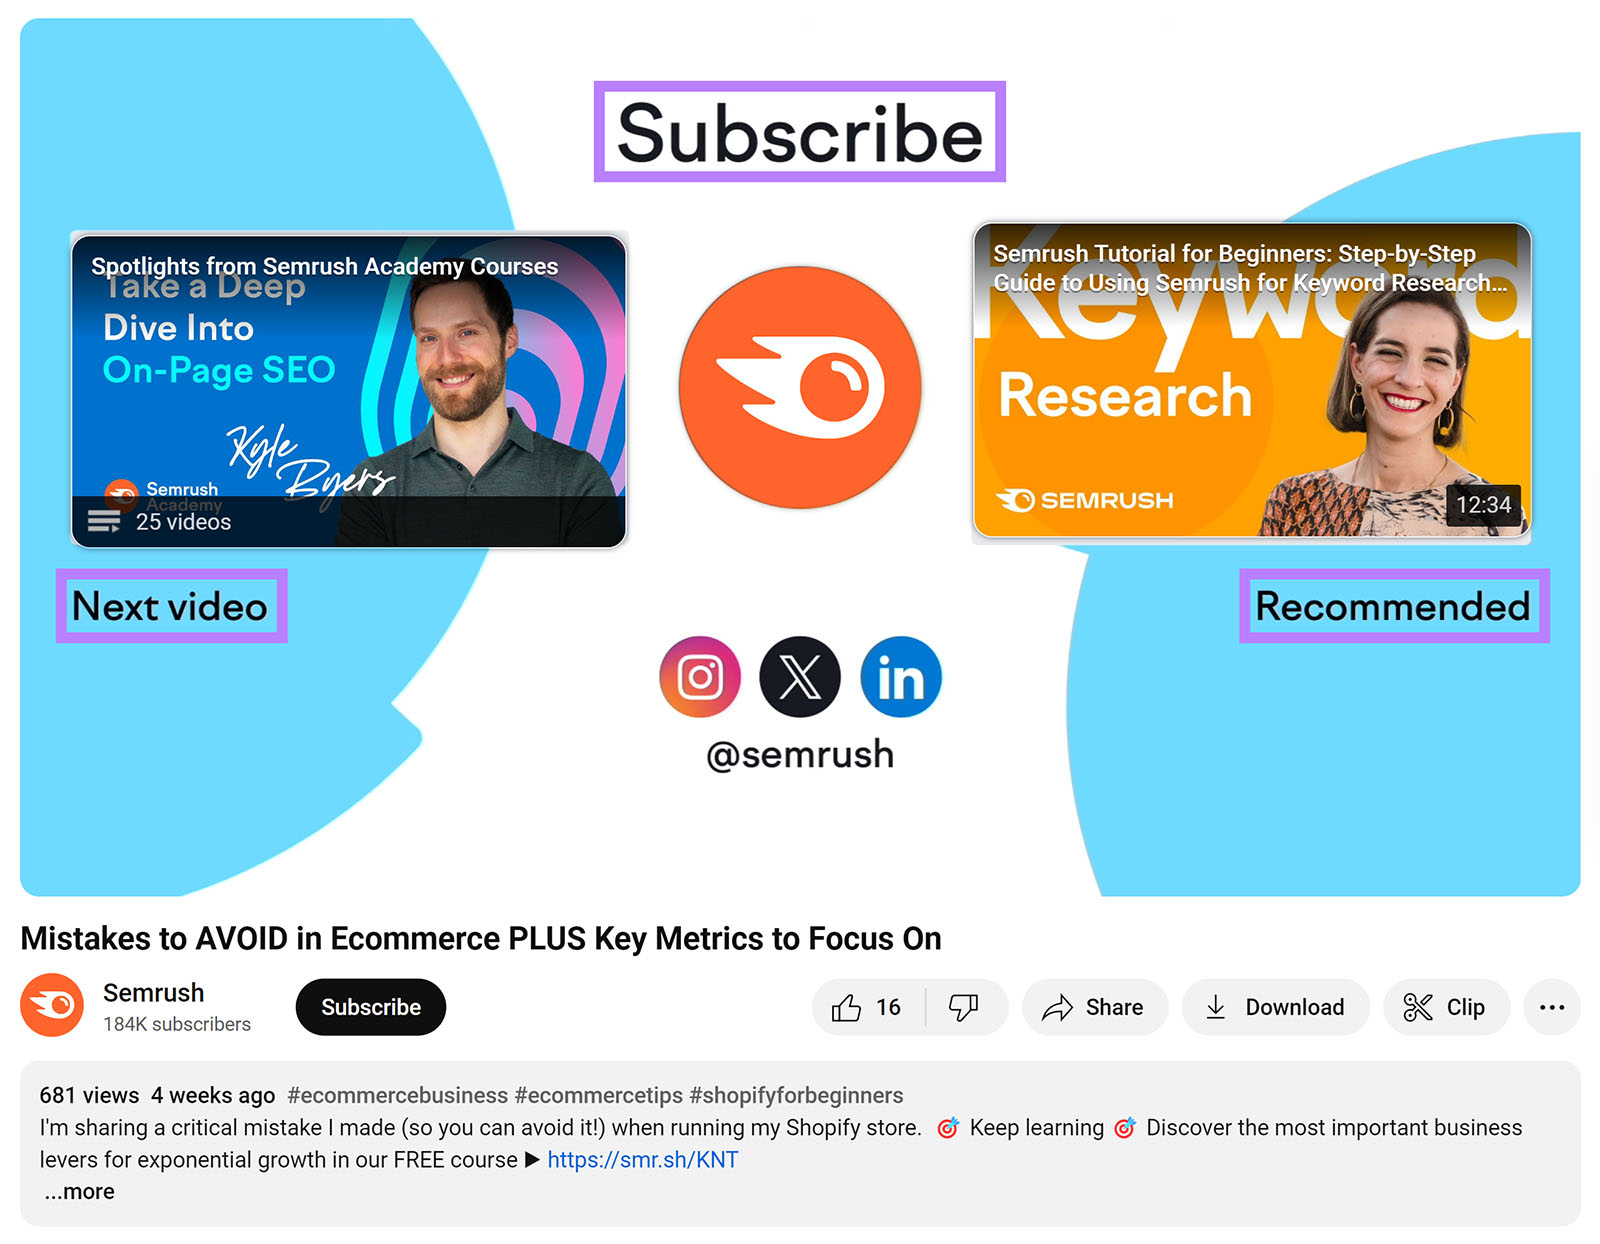 Semrush YouTube video end screen with Next video, Subscribe, and Recommended CTAs highlighted.